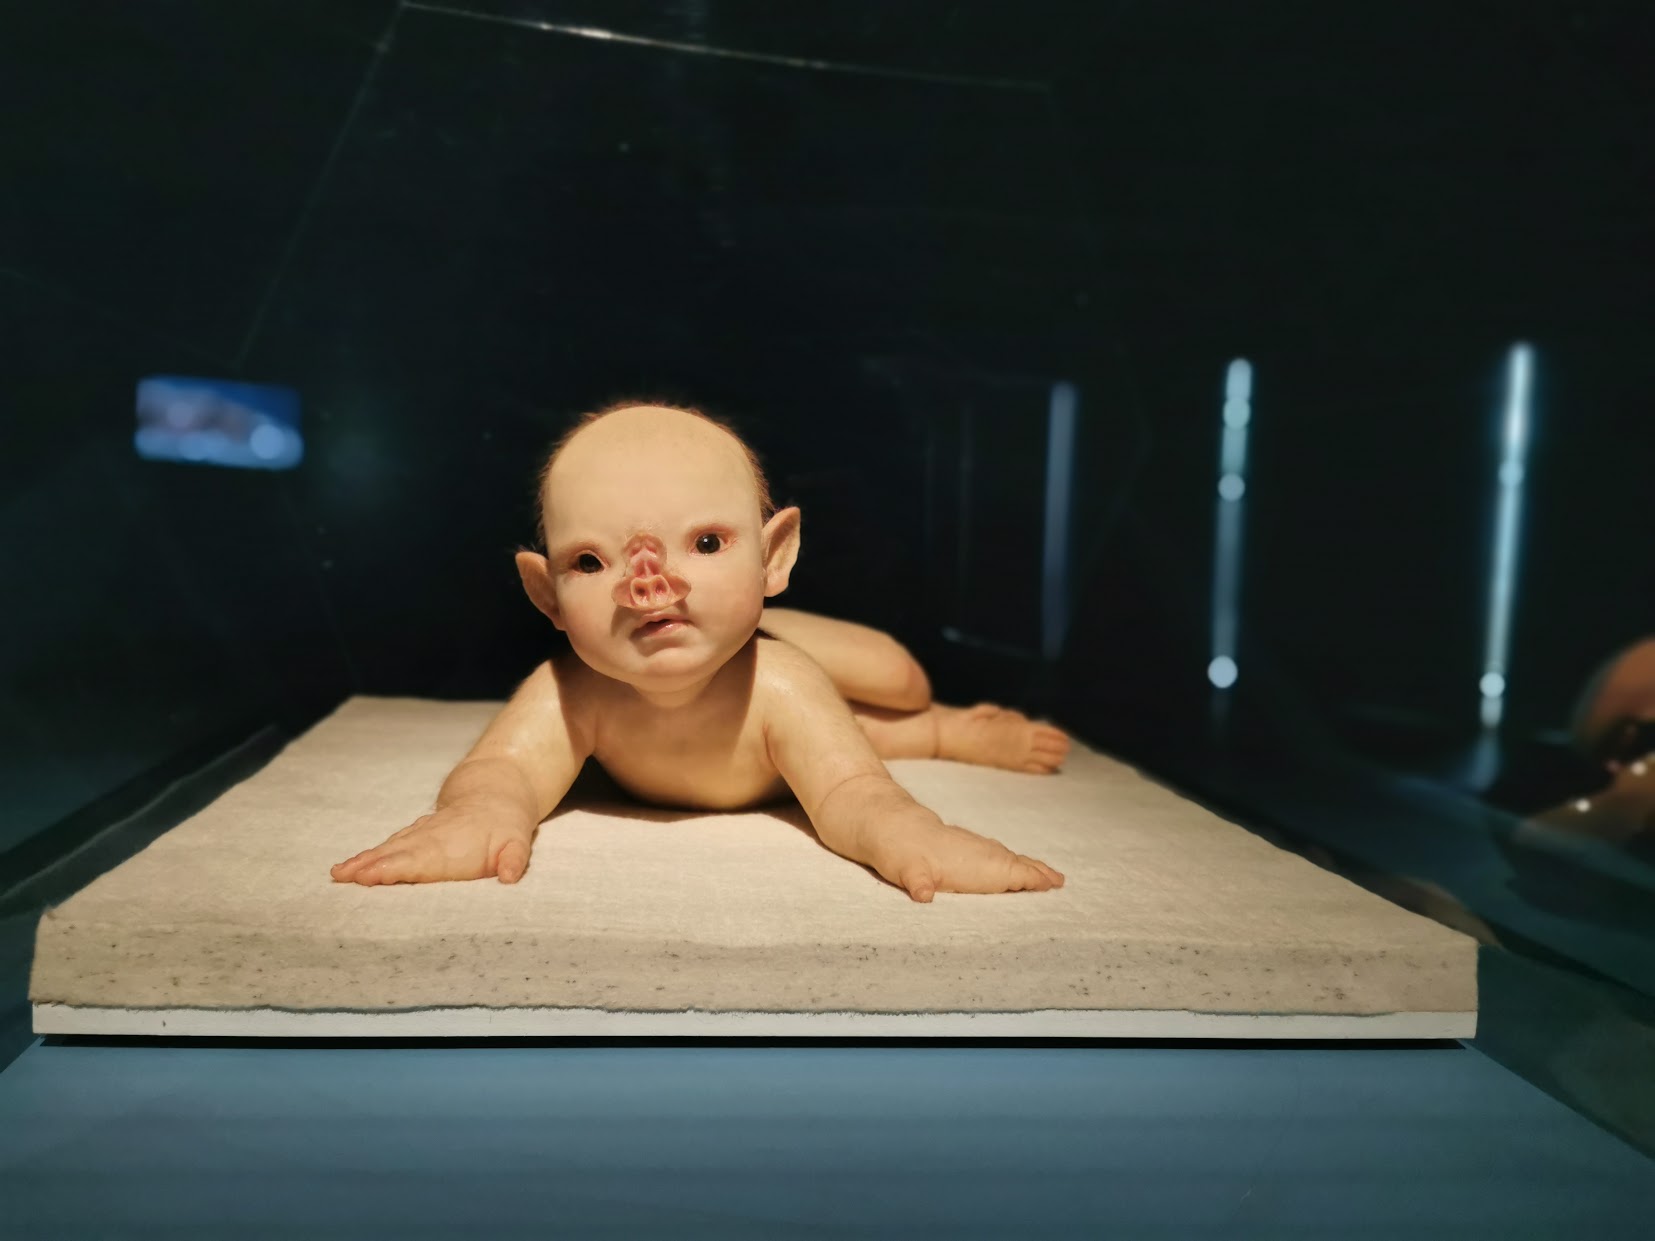 We Are Connected by Patricia Piccinini